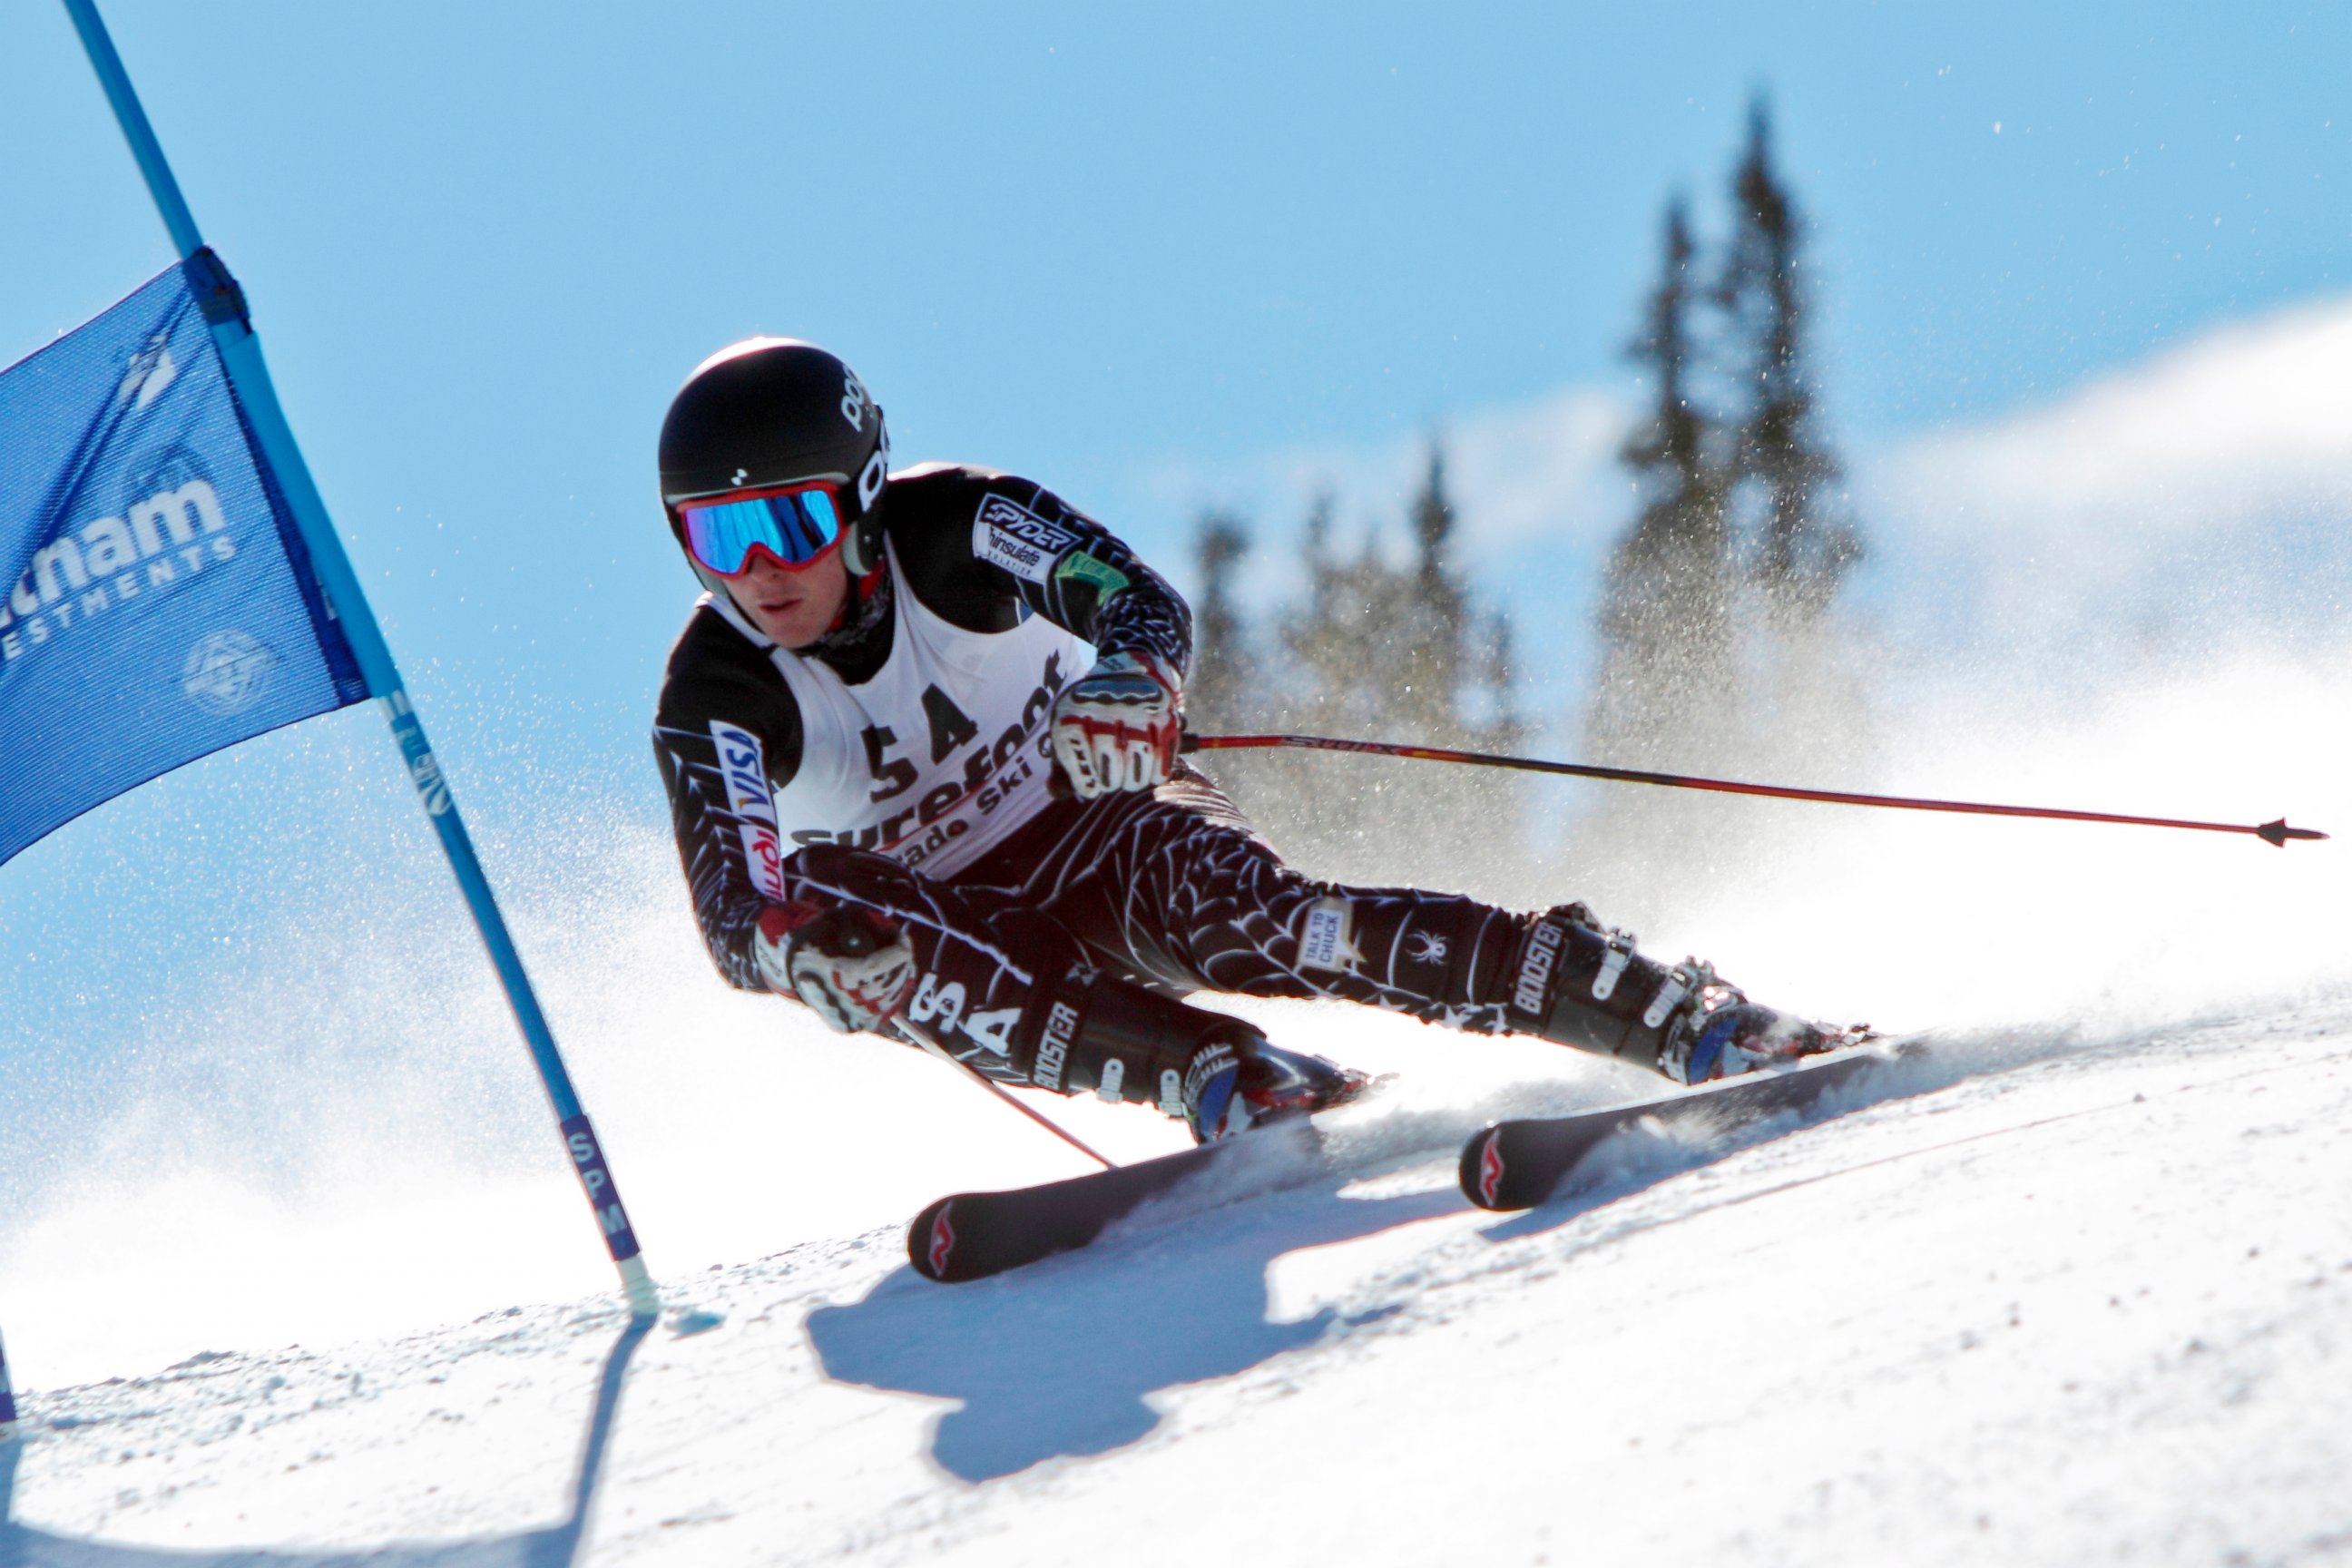 PHOTO: Ronnie Berlack skis past a slalom flag at the U.S. Ski Team Speed Center at Copper Mountain